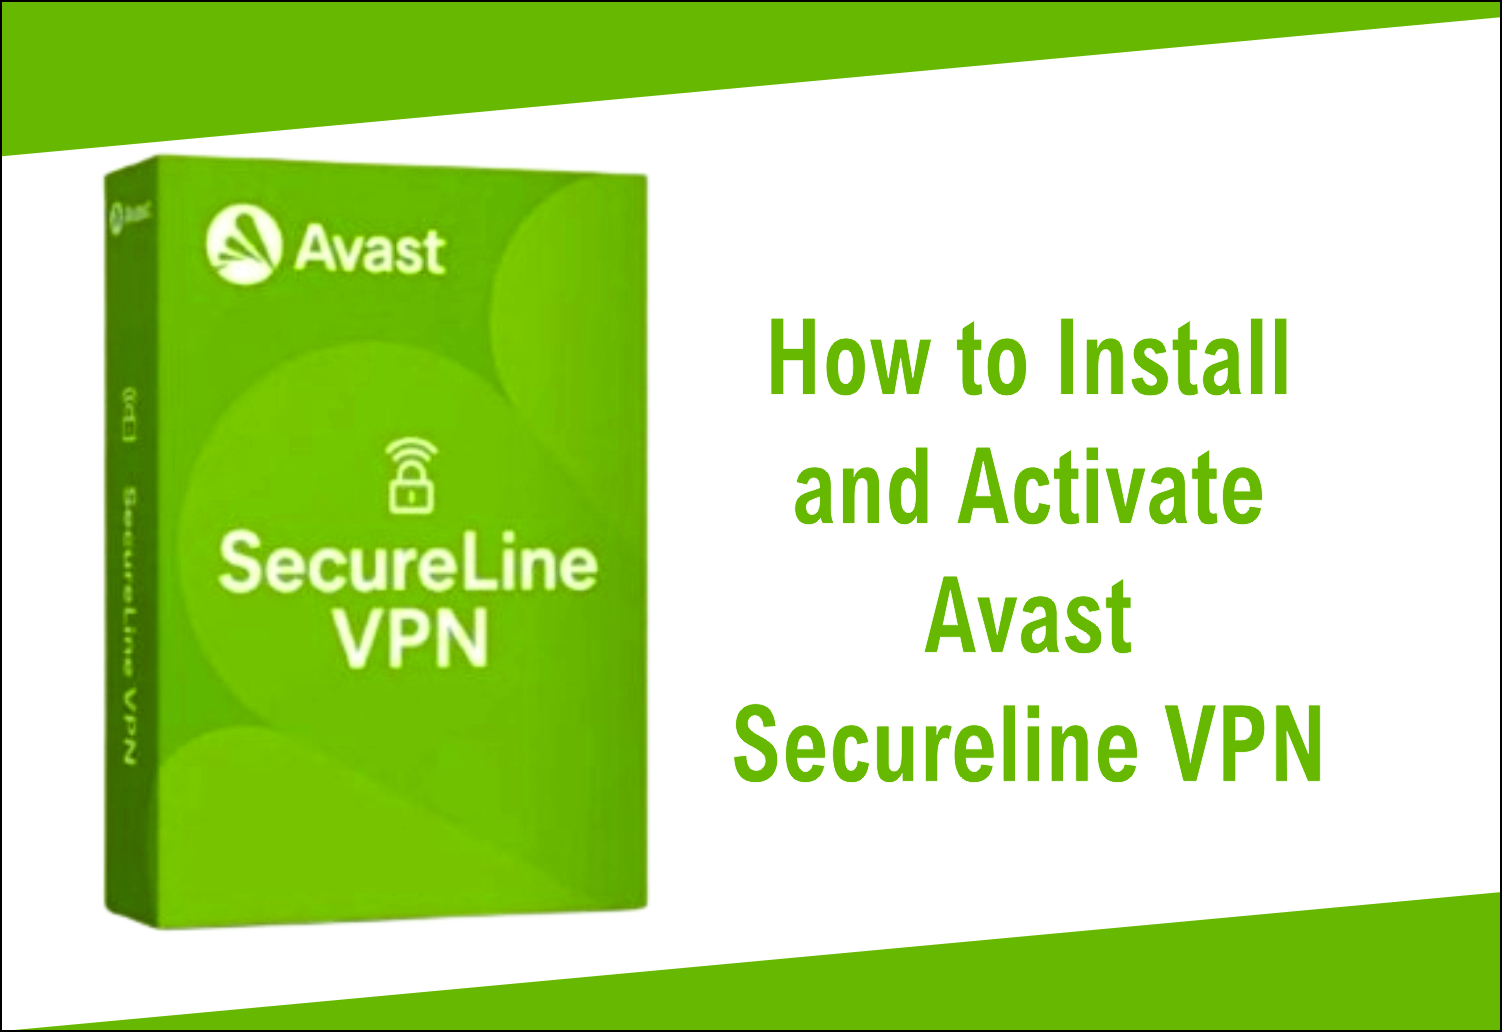 How to Install and Activate Avast Secureline VPN